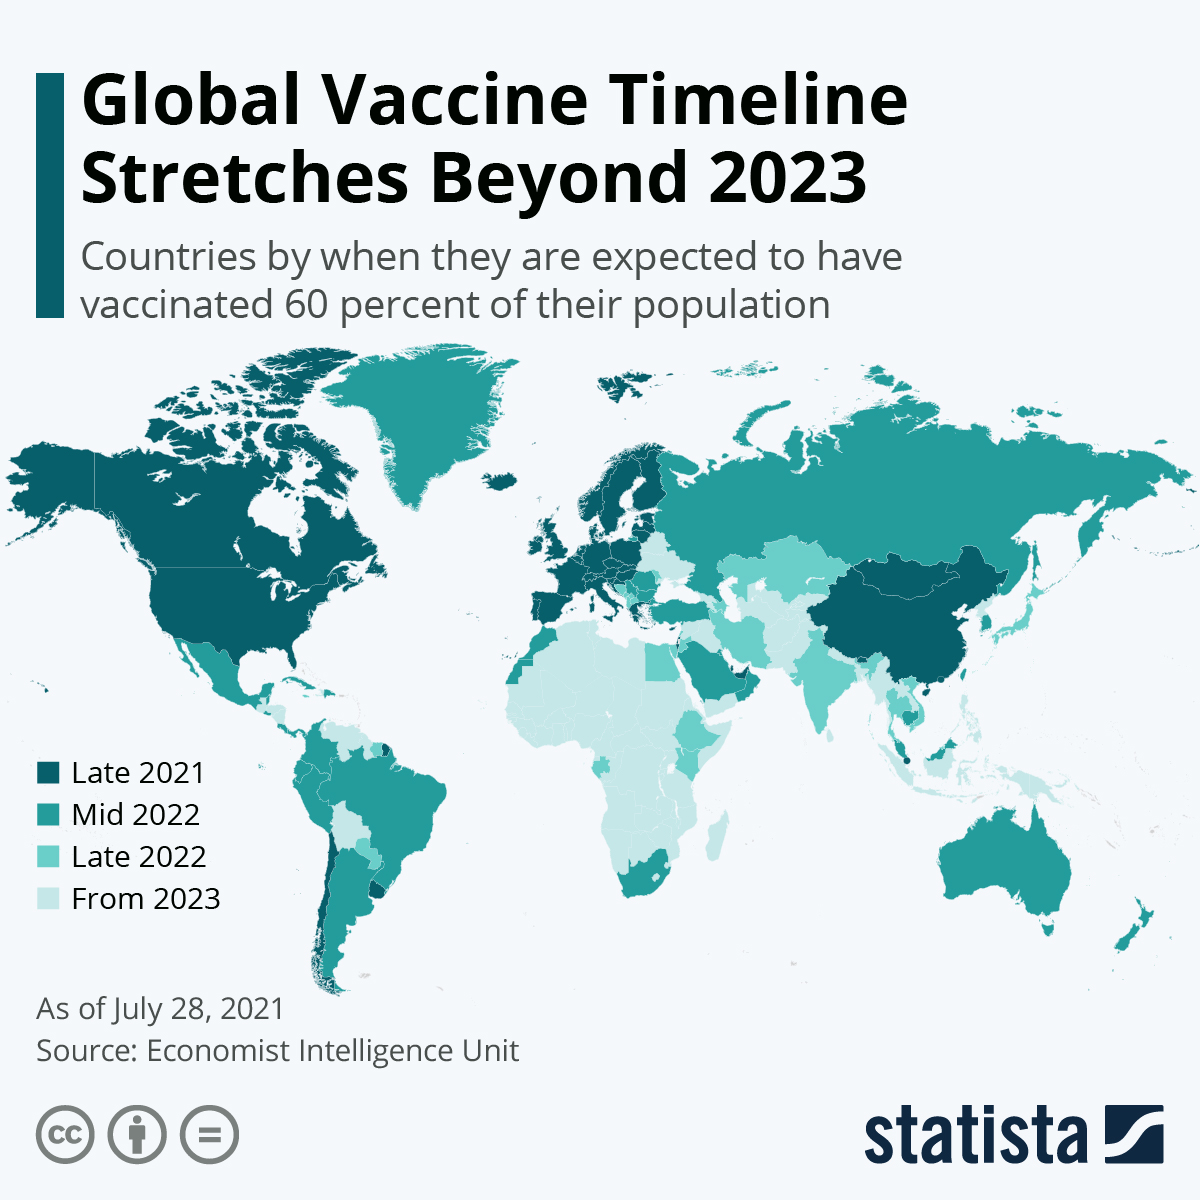 Global Vaccine Timeline Stretches Beyond 2023